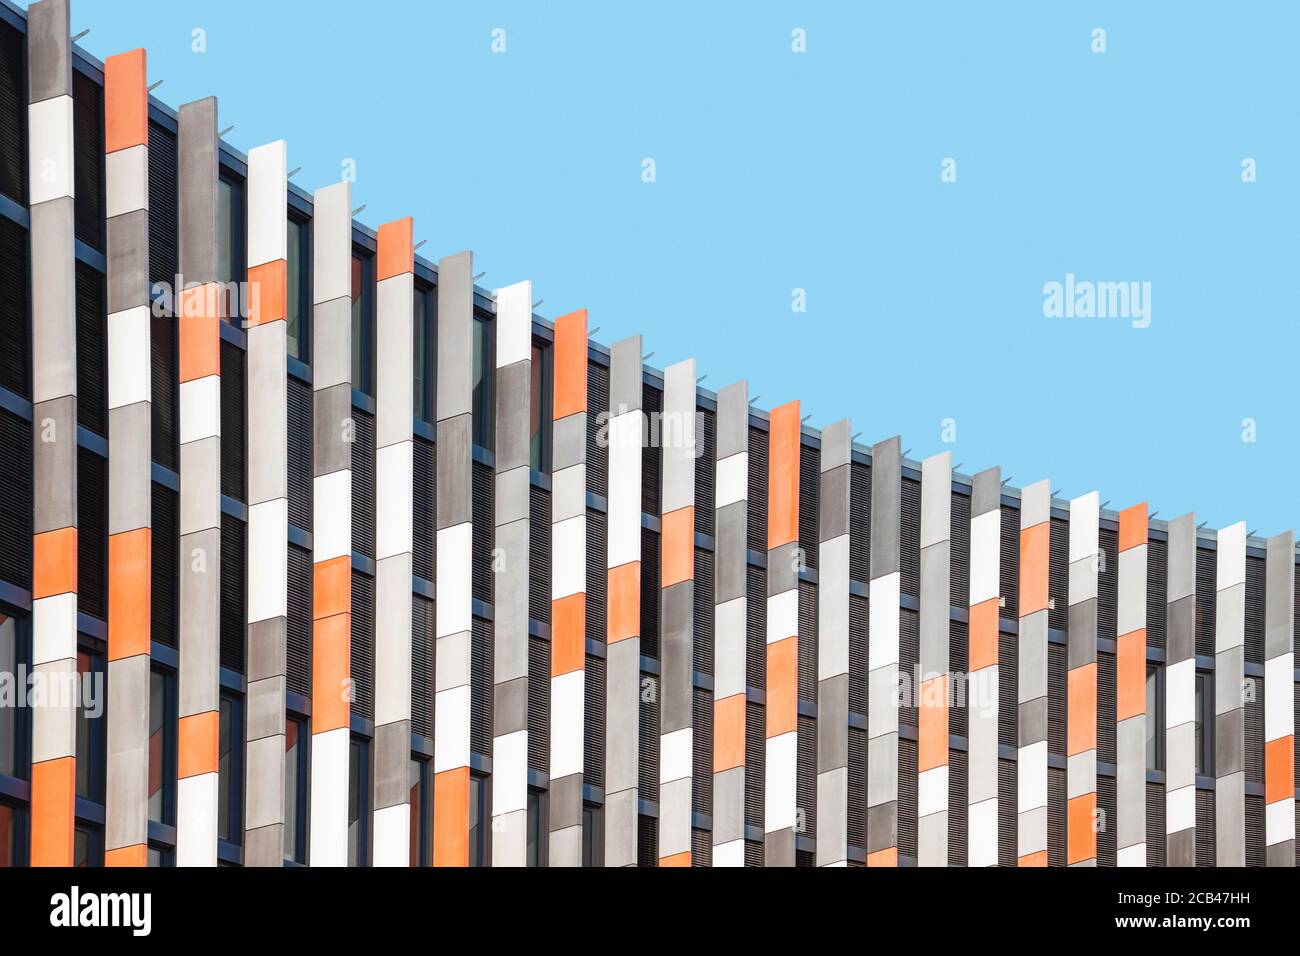 Colorful detail of modern building facade against blue sky. Abstract geometric architectural background Stock Photo